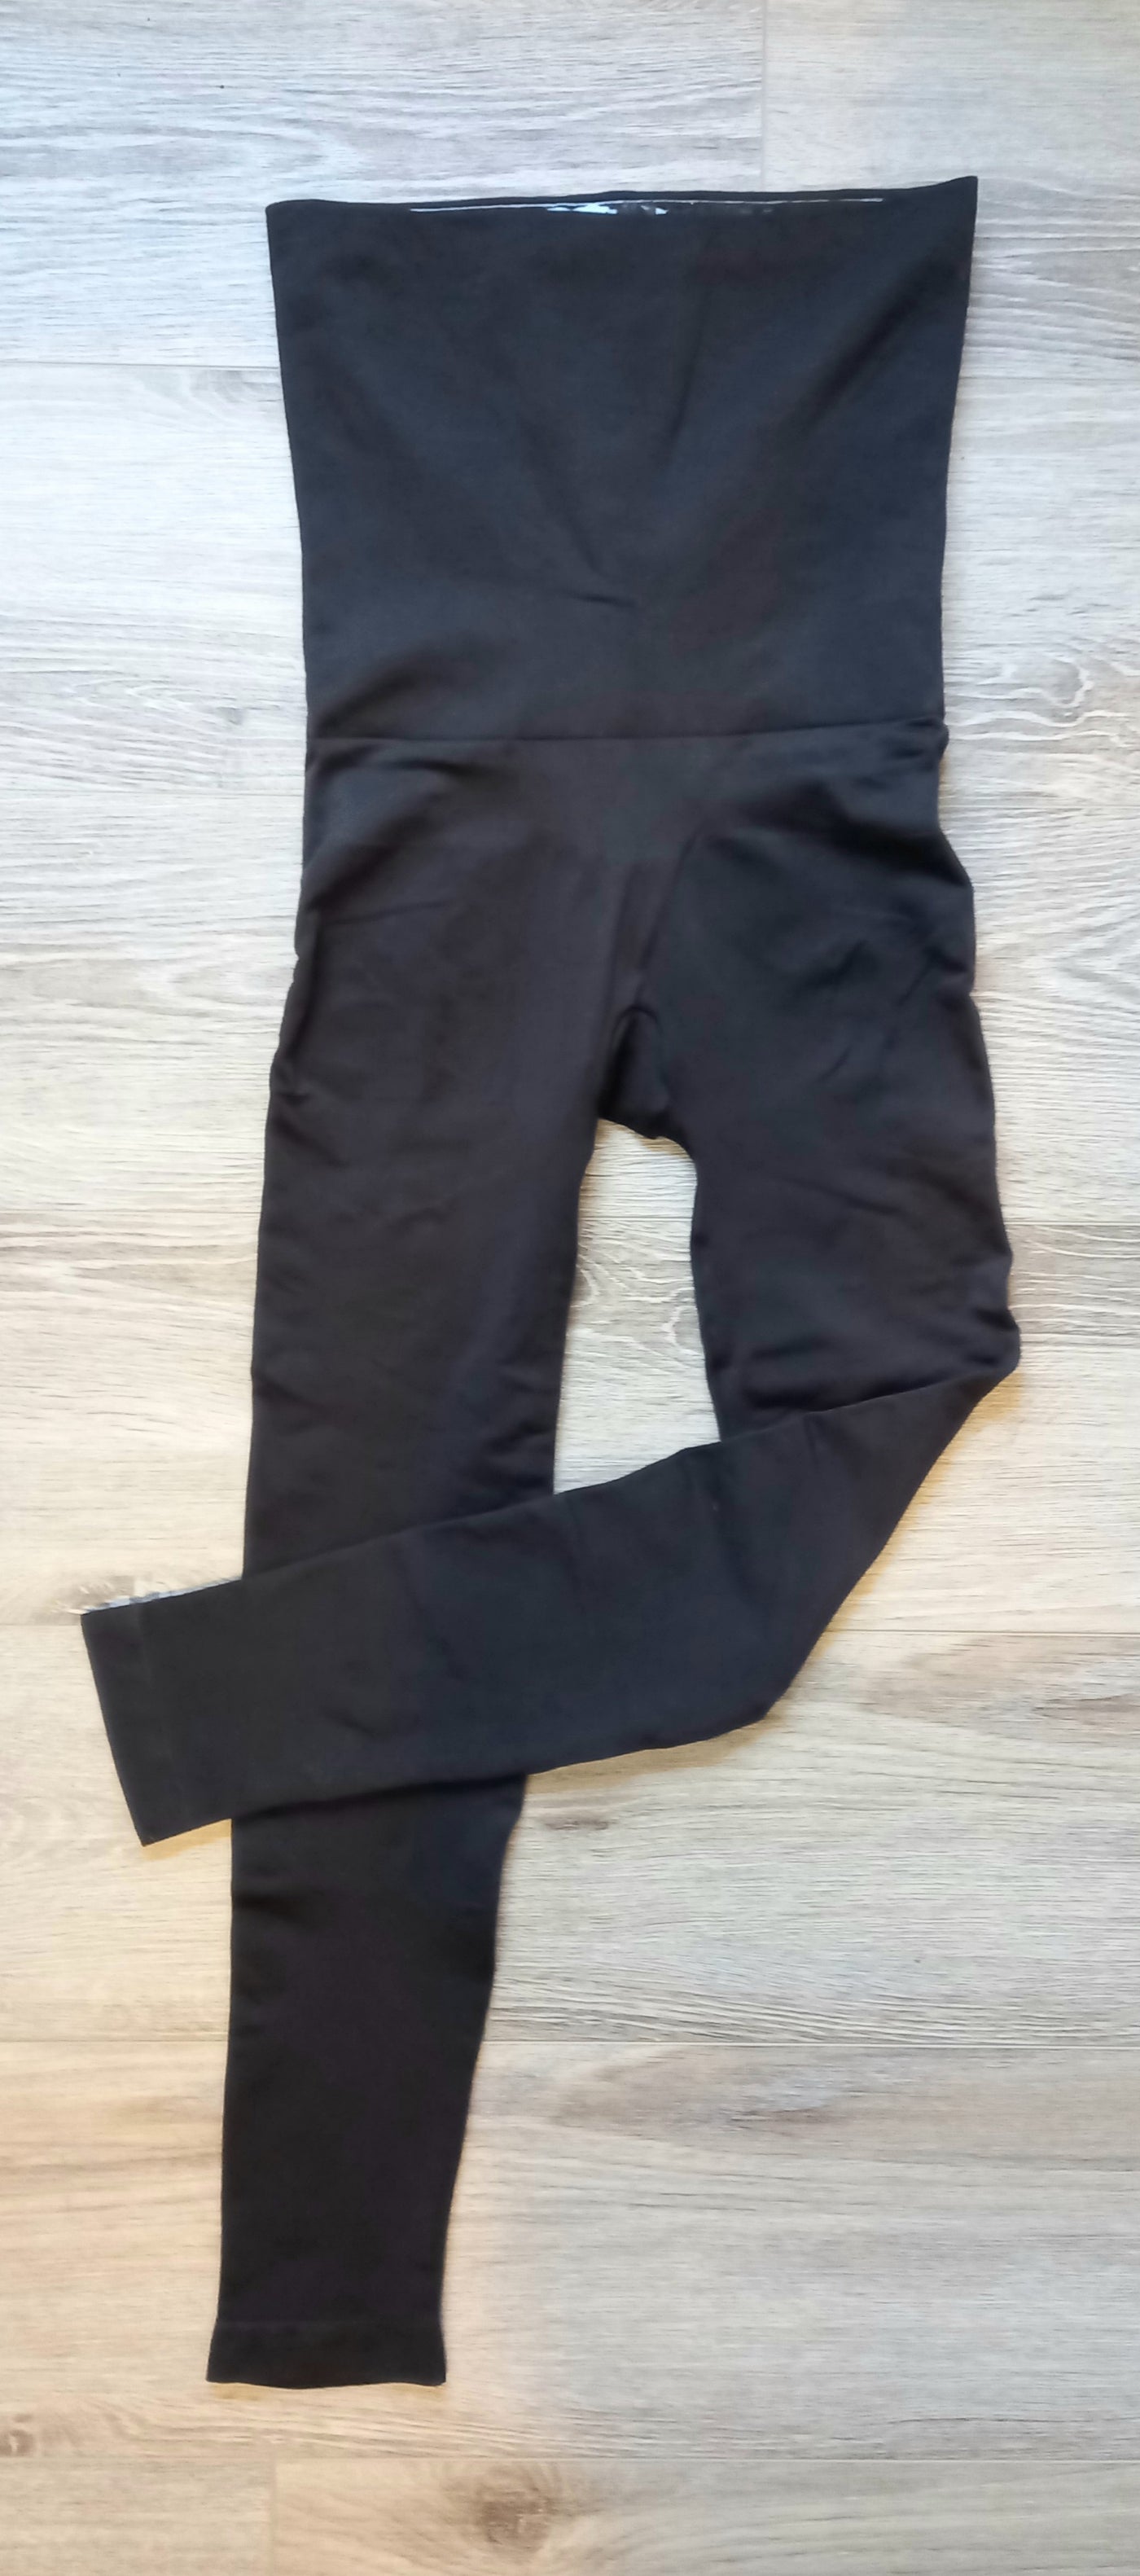 Seraphine Black Post Maternity Shaping Leggings - Size S (Approx UK 8/10)